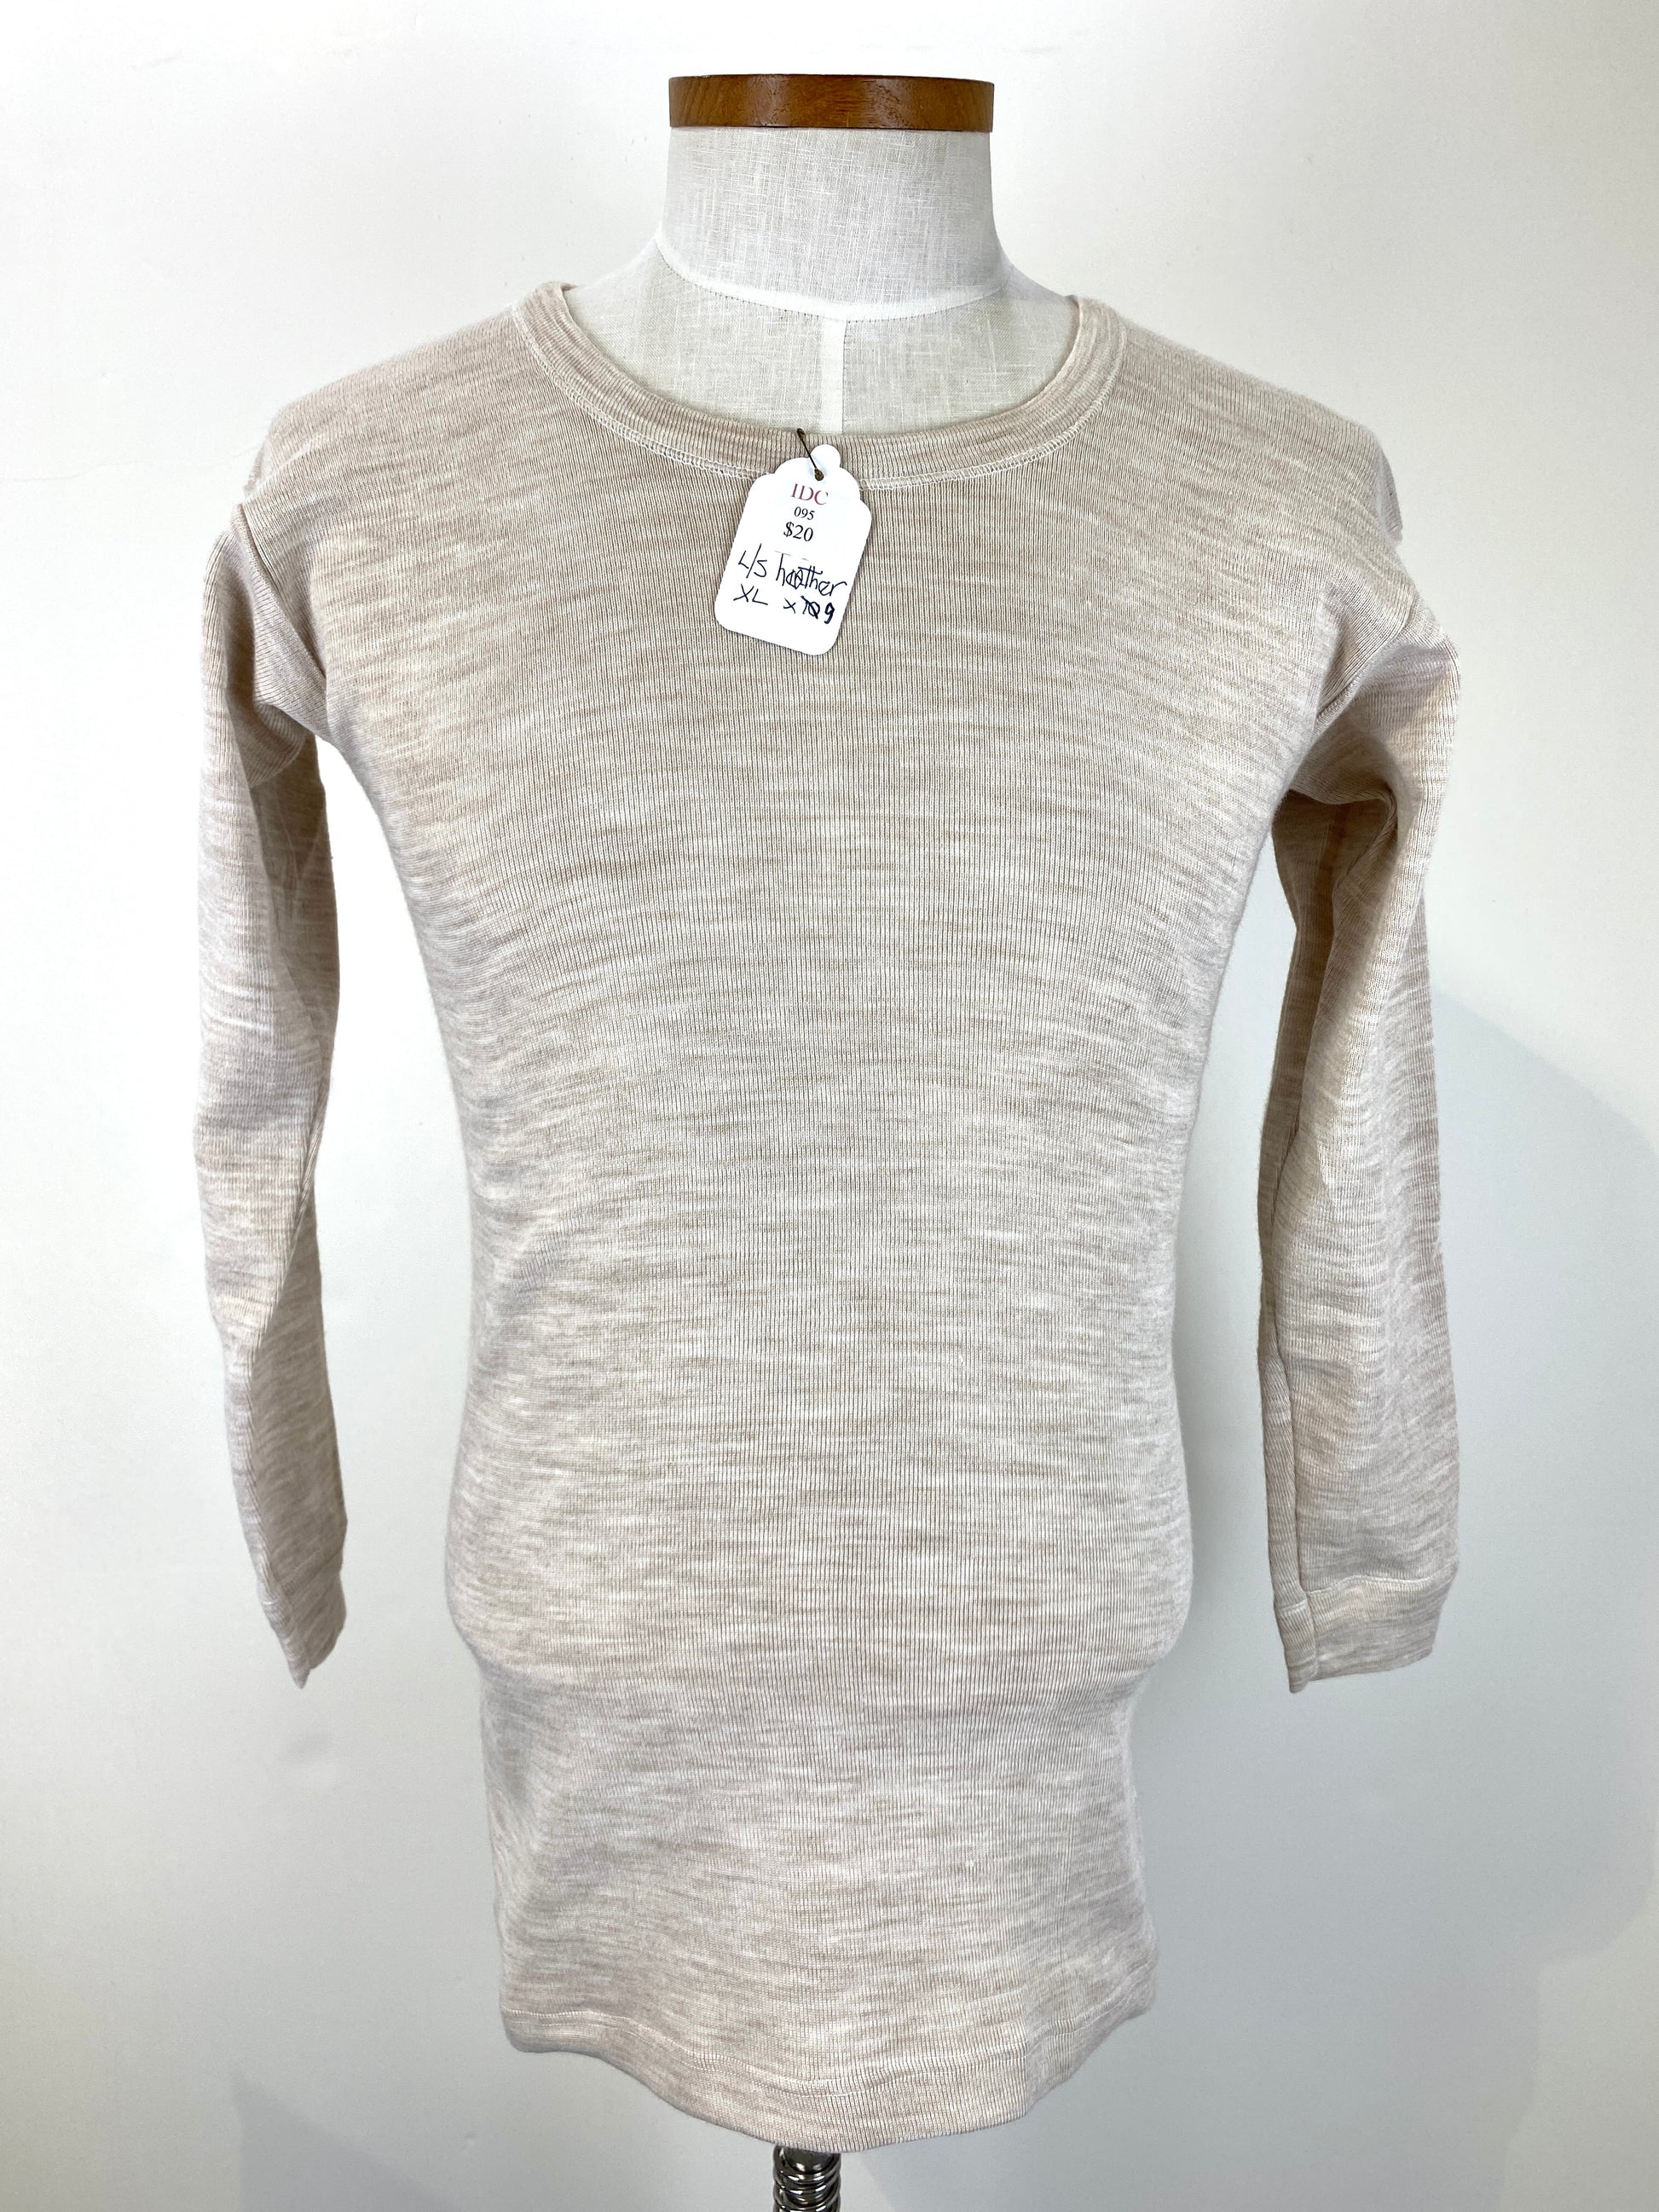 Vintage 1980s Deadstock Heather Long-Sleeve Knit T-Shirt, NOS